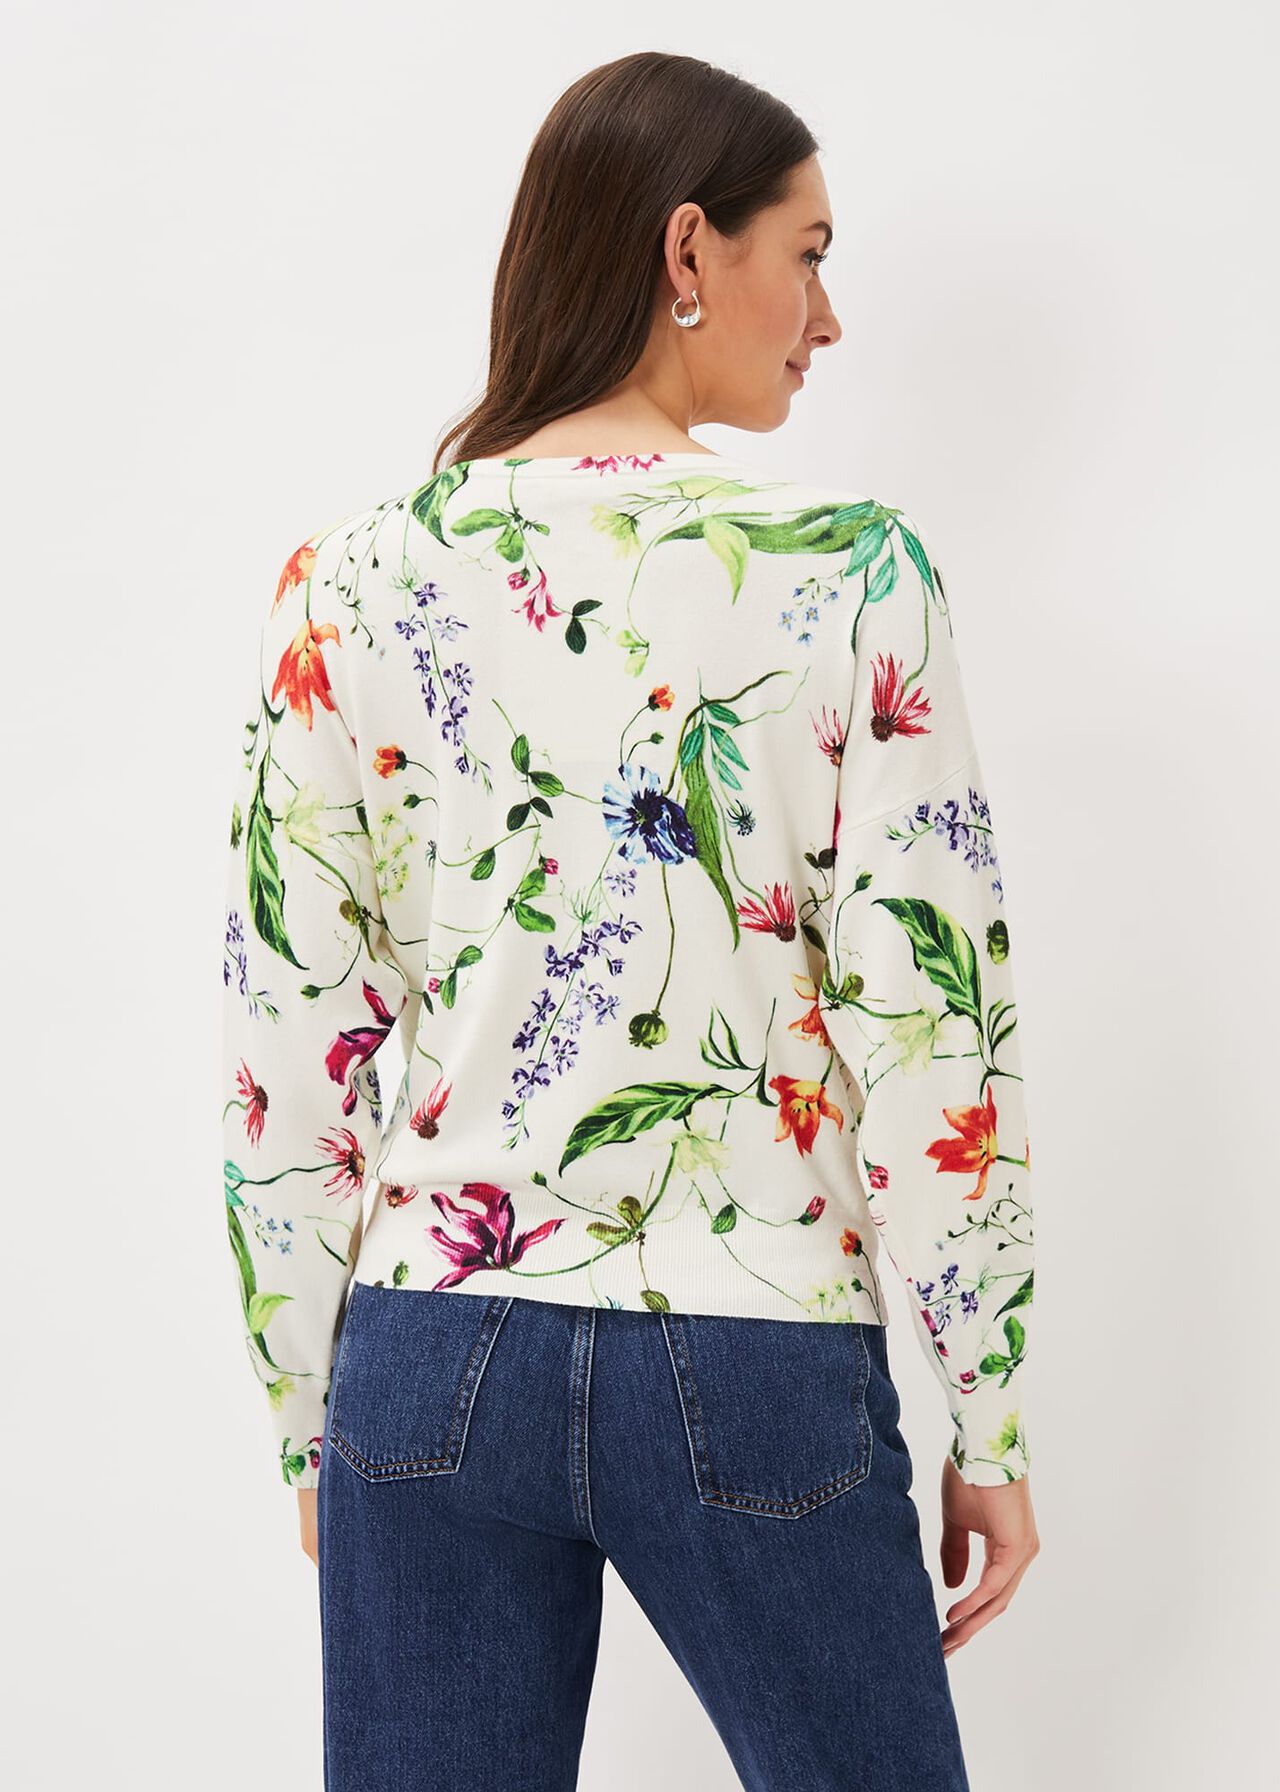 Mably Floral Print Knit